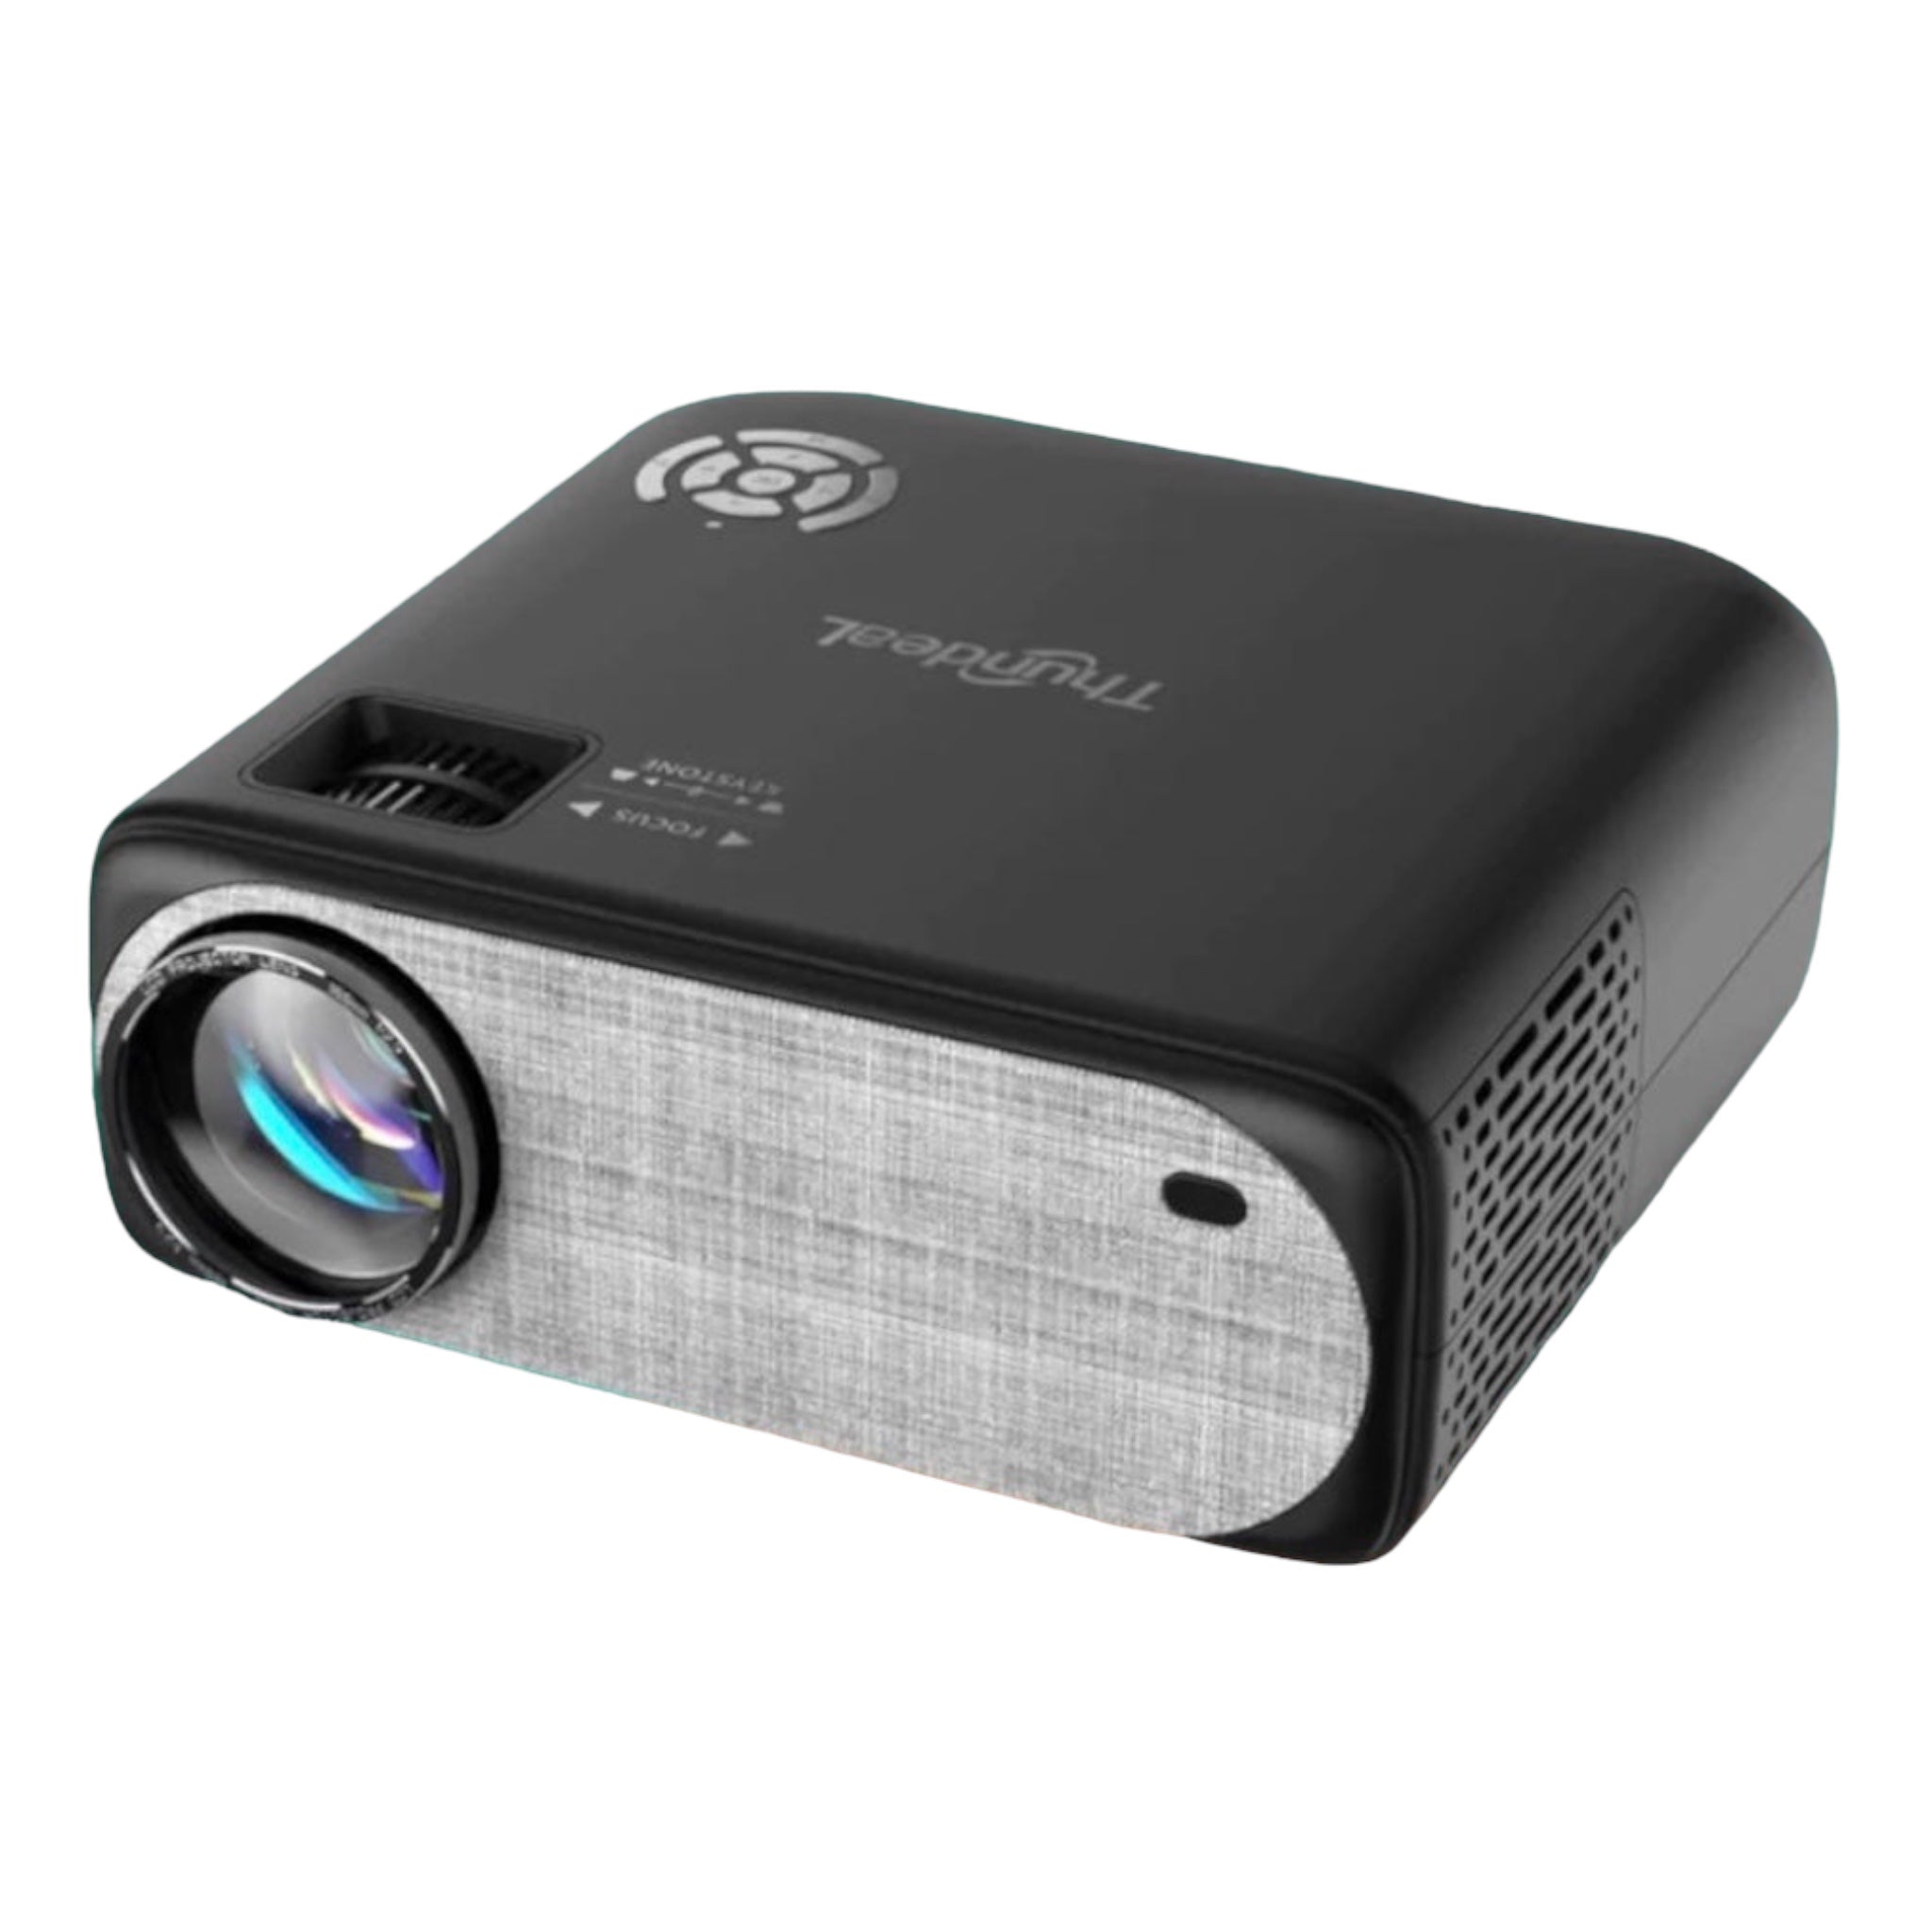 Prescribir Eficacia Ver internet ThundeaL 1080P Projector TD97 WiFi LED Full HD Projector Video Proyect